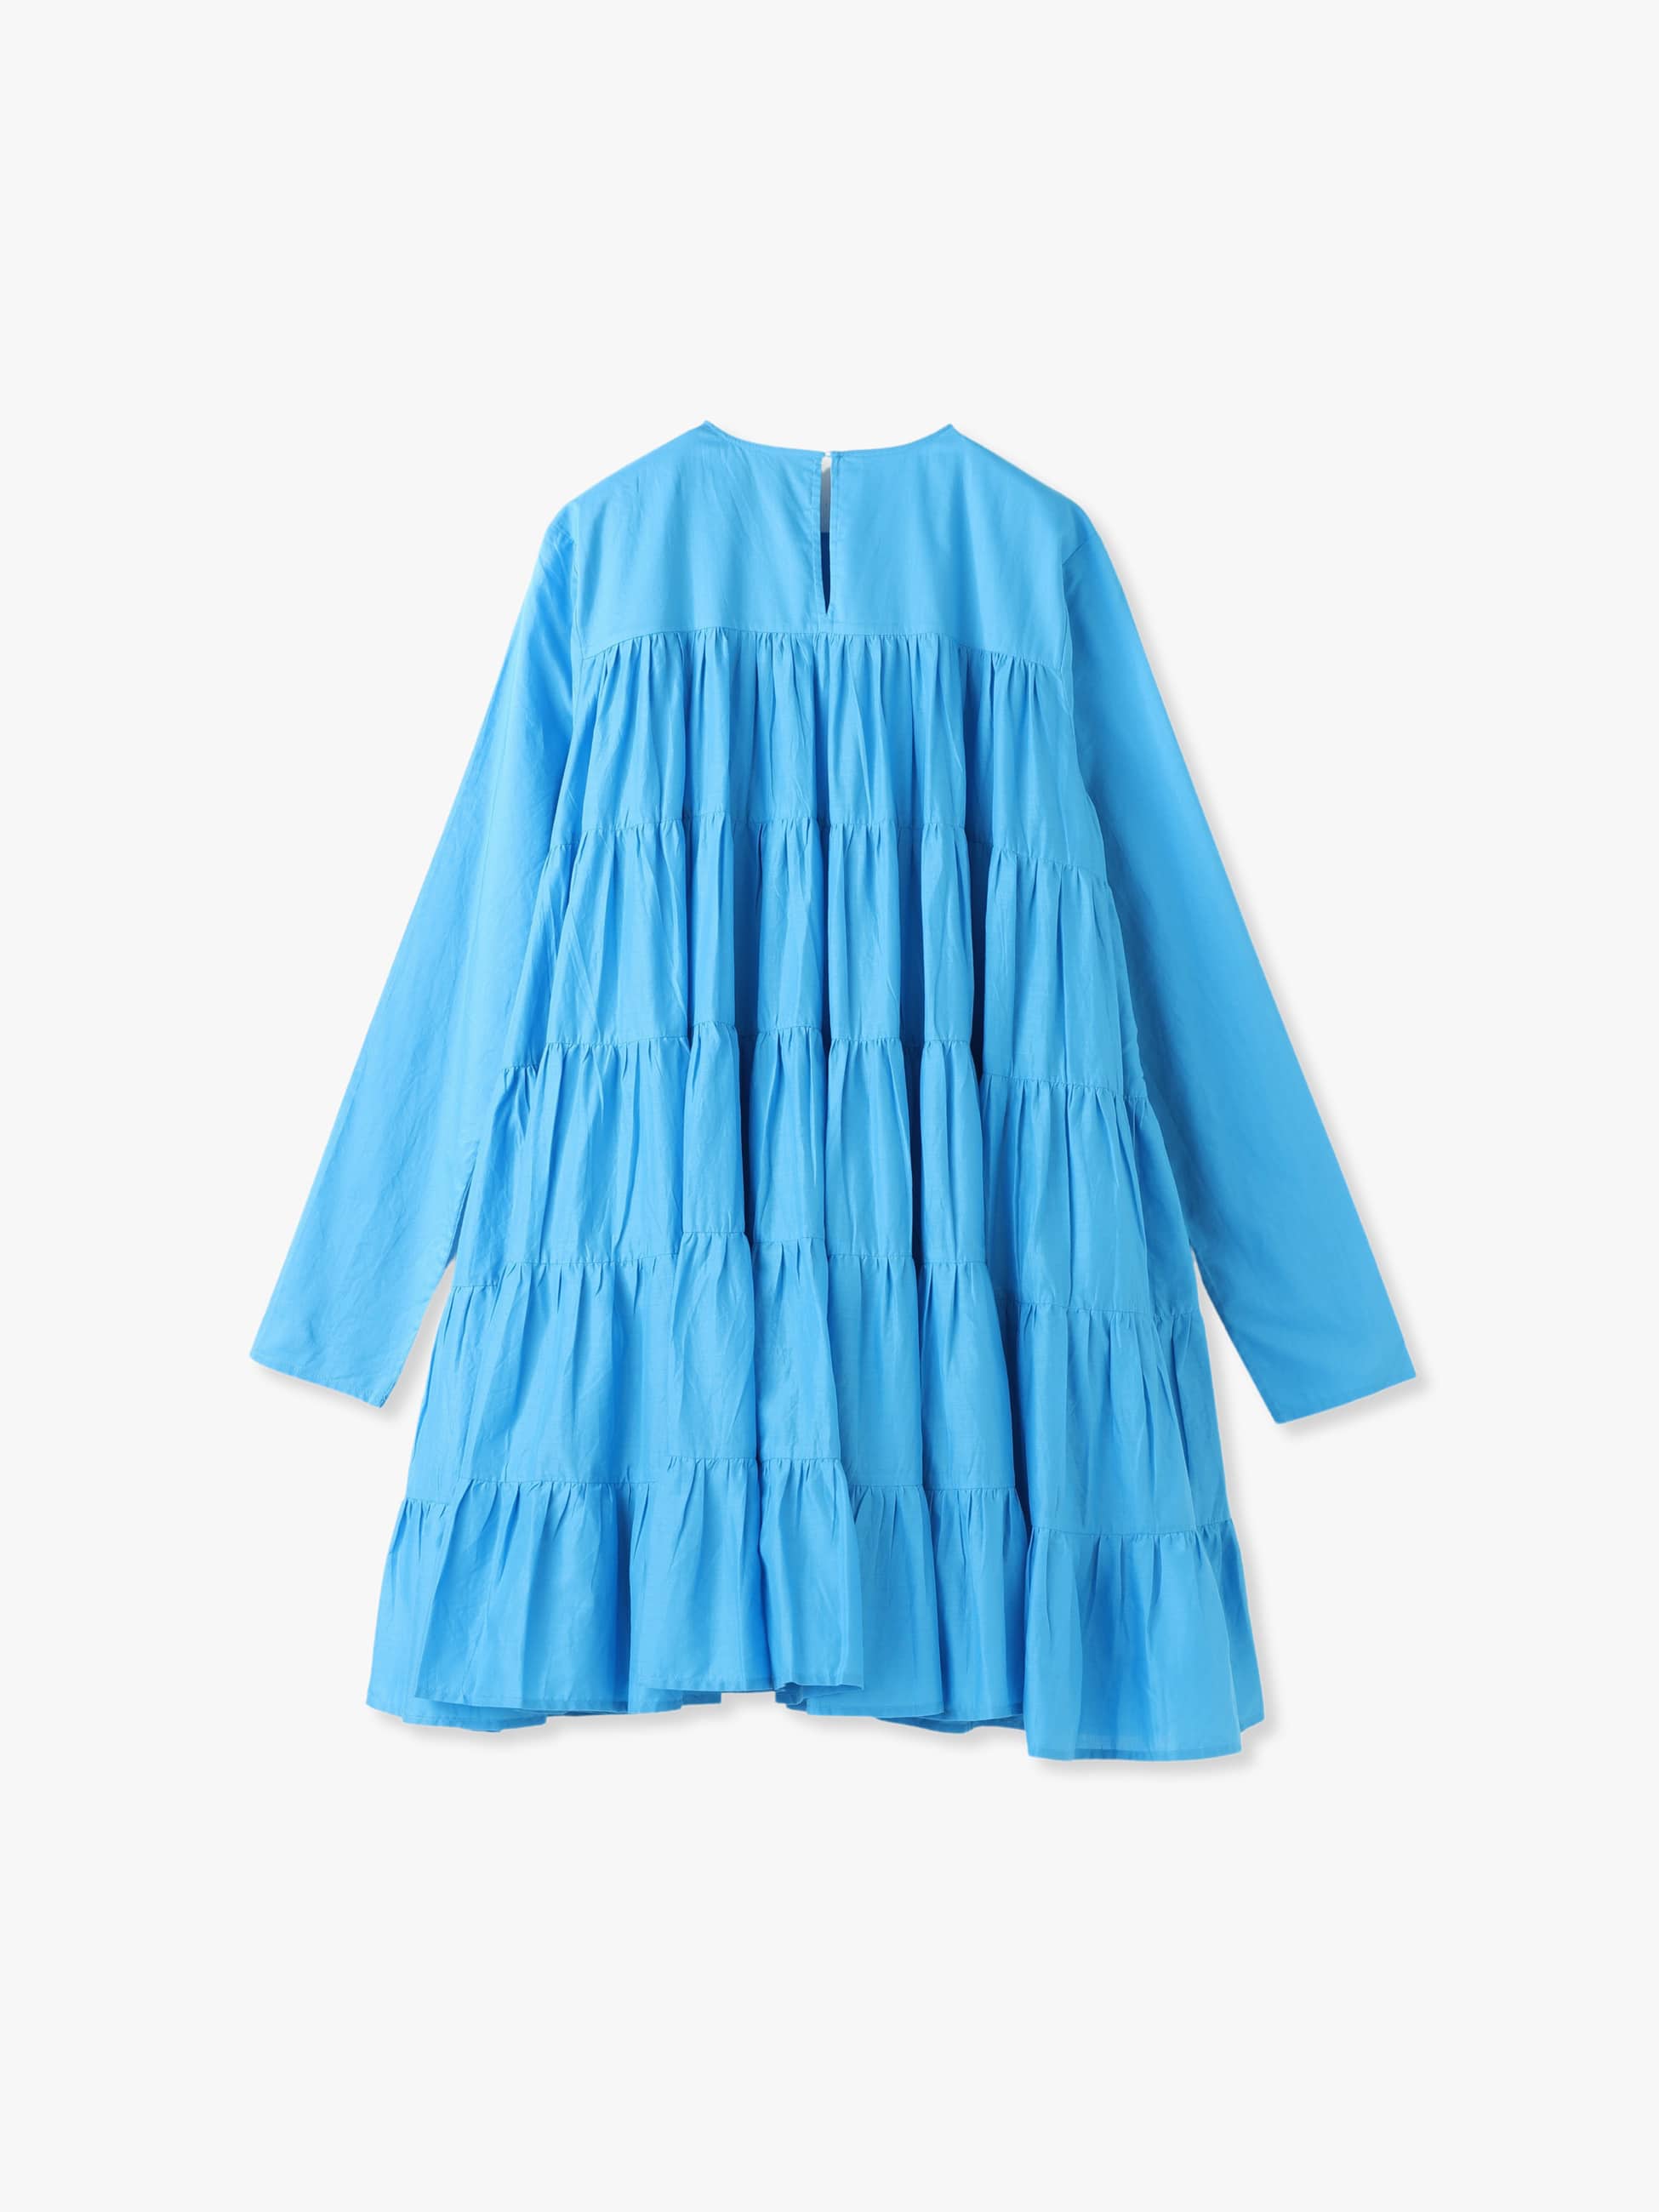 Soliman Dress (turquoise blue)